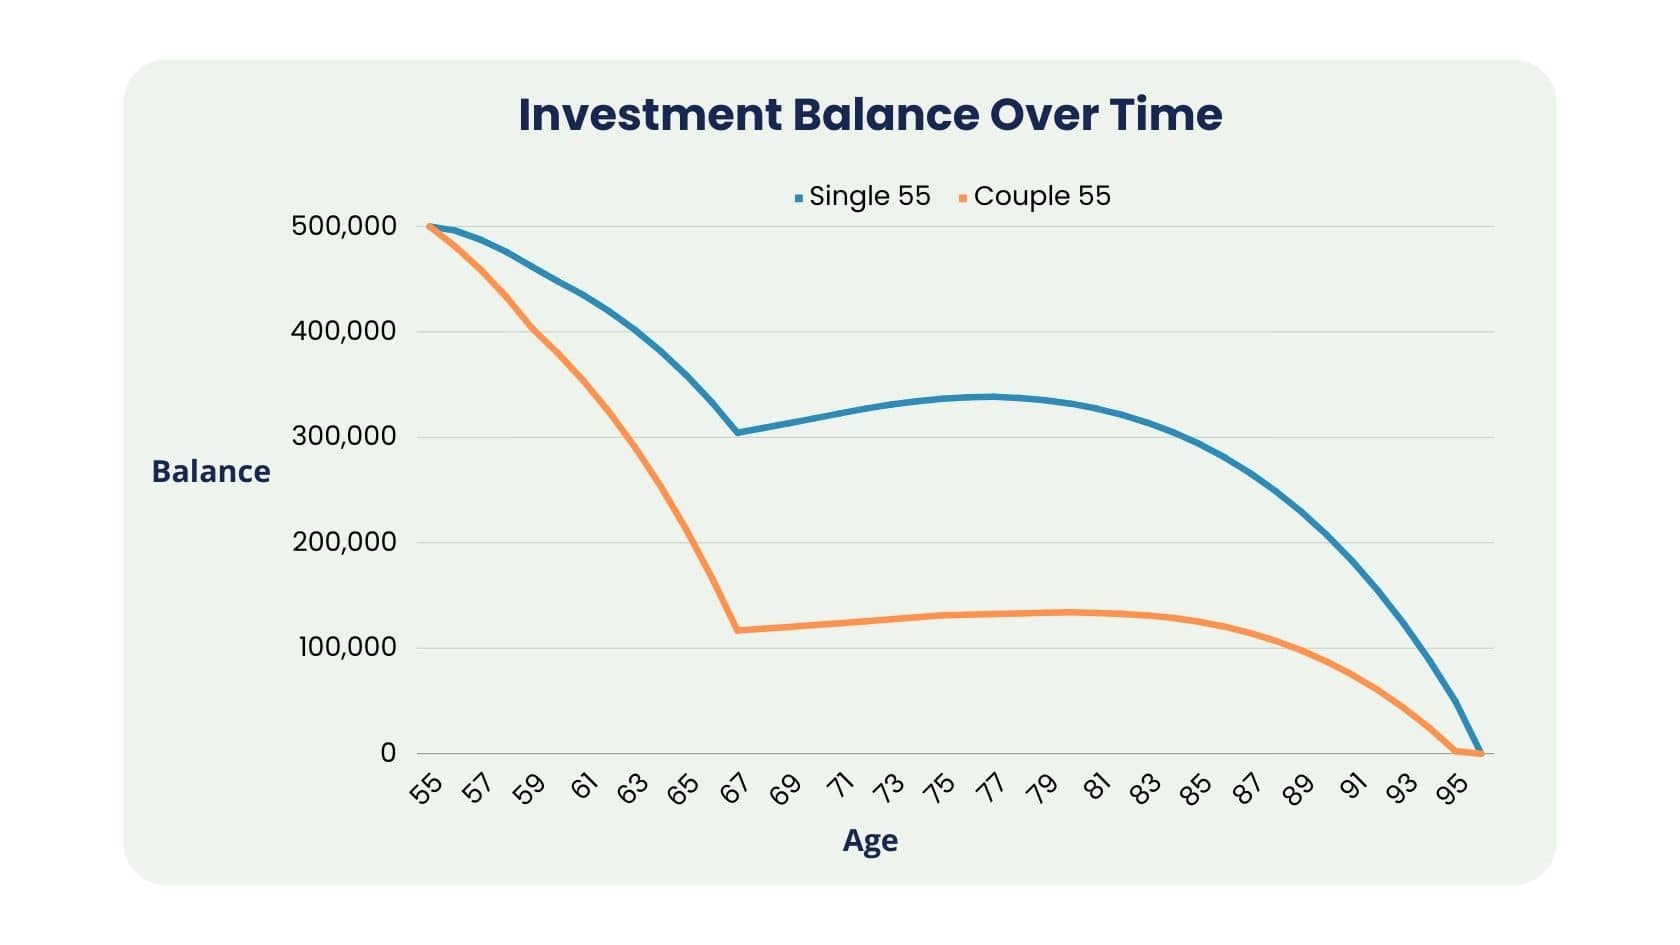 Investment Balance Over Time 55